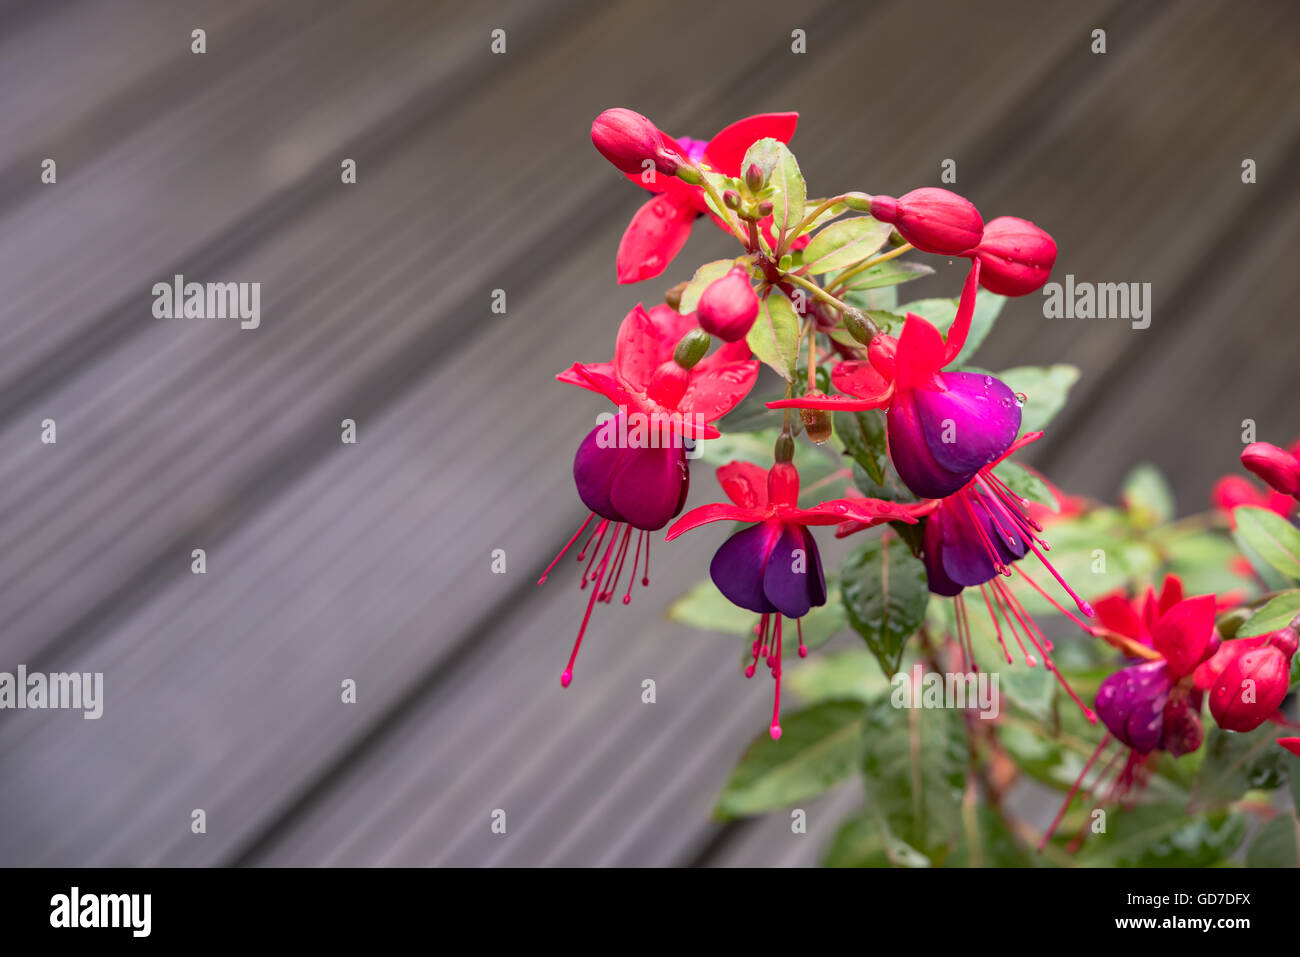 Pink flowers blossomig in summer Stock Photo